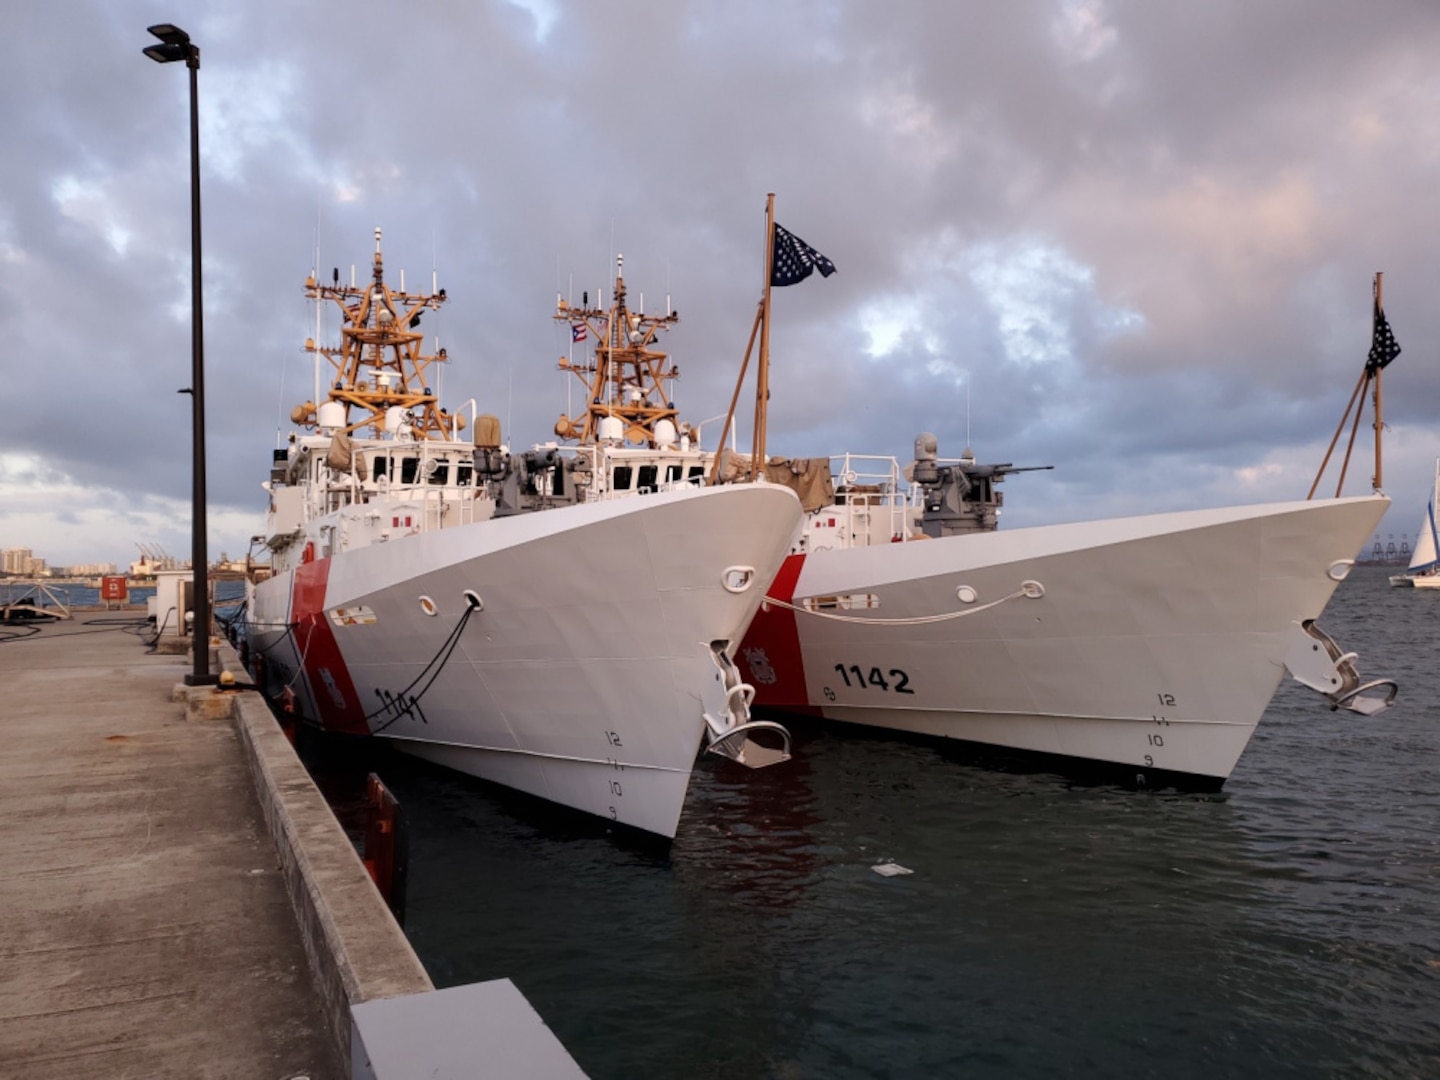 SAN JUAN, Puerto Rico (March 31, 202) Sister ships USCGC Charles Moulthrope (WPC 1141) and USCGC Robert Goldman (WPC 1142) moor side-by-side March 31, 2021, at Sector San Juan as they continue their journey to their new homeport. Charles Moulthrope and Robert Goldman are en route to their new homeport in Bahrain in support of the Navy’s U.S. Fifth Fleet and U.S. Coast Guard Patrol Forces Southwest Asia. While in the U.S. Navy’s Sixth Fleet area of responsibility, the crews will support engagements with partner countries strengthening relationships and demonstrating our continued commitment to global maritime security and stability. (U.S. Coast Guard photo by Petty Officer 1st Class Sydney Niemi/Released)